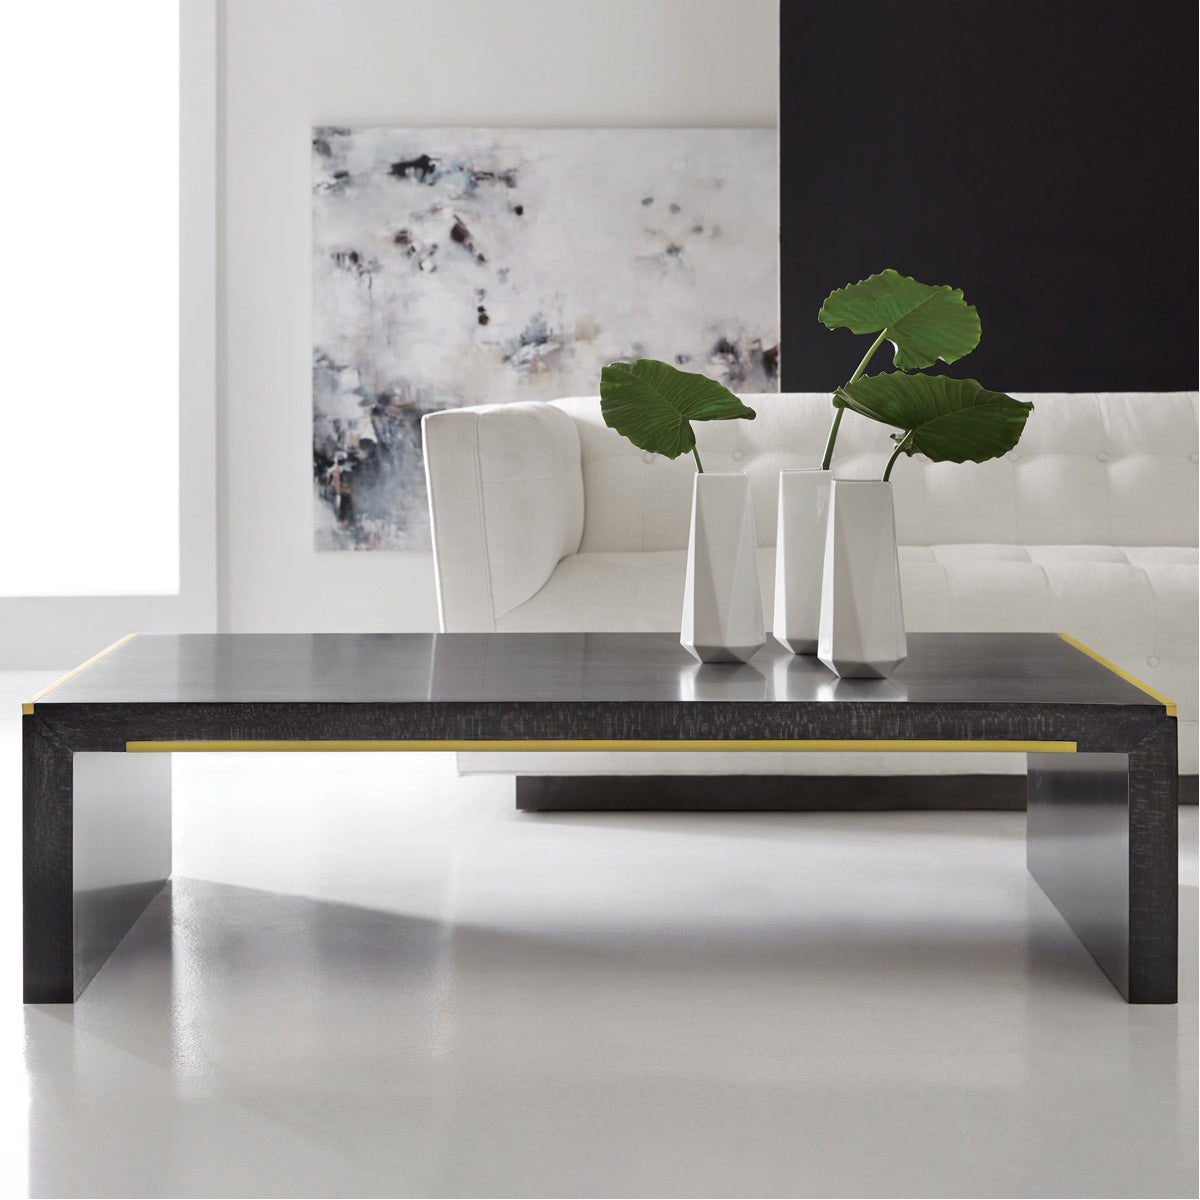 Somerset Bay Home Mirage Cocktail Table